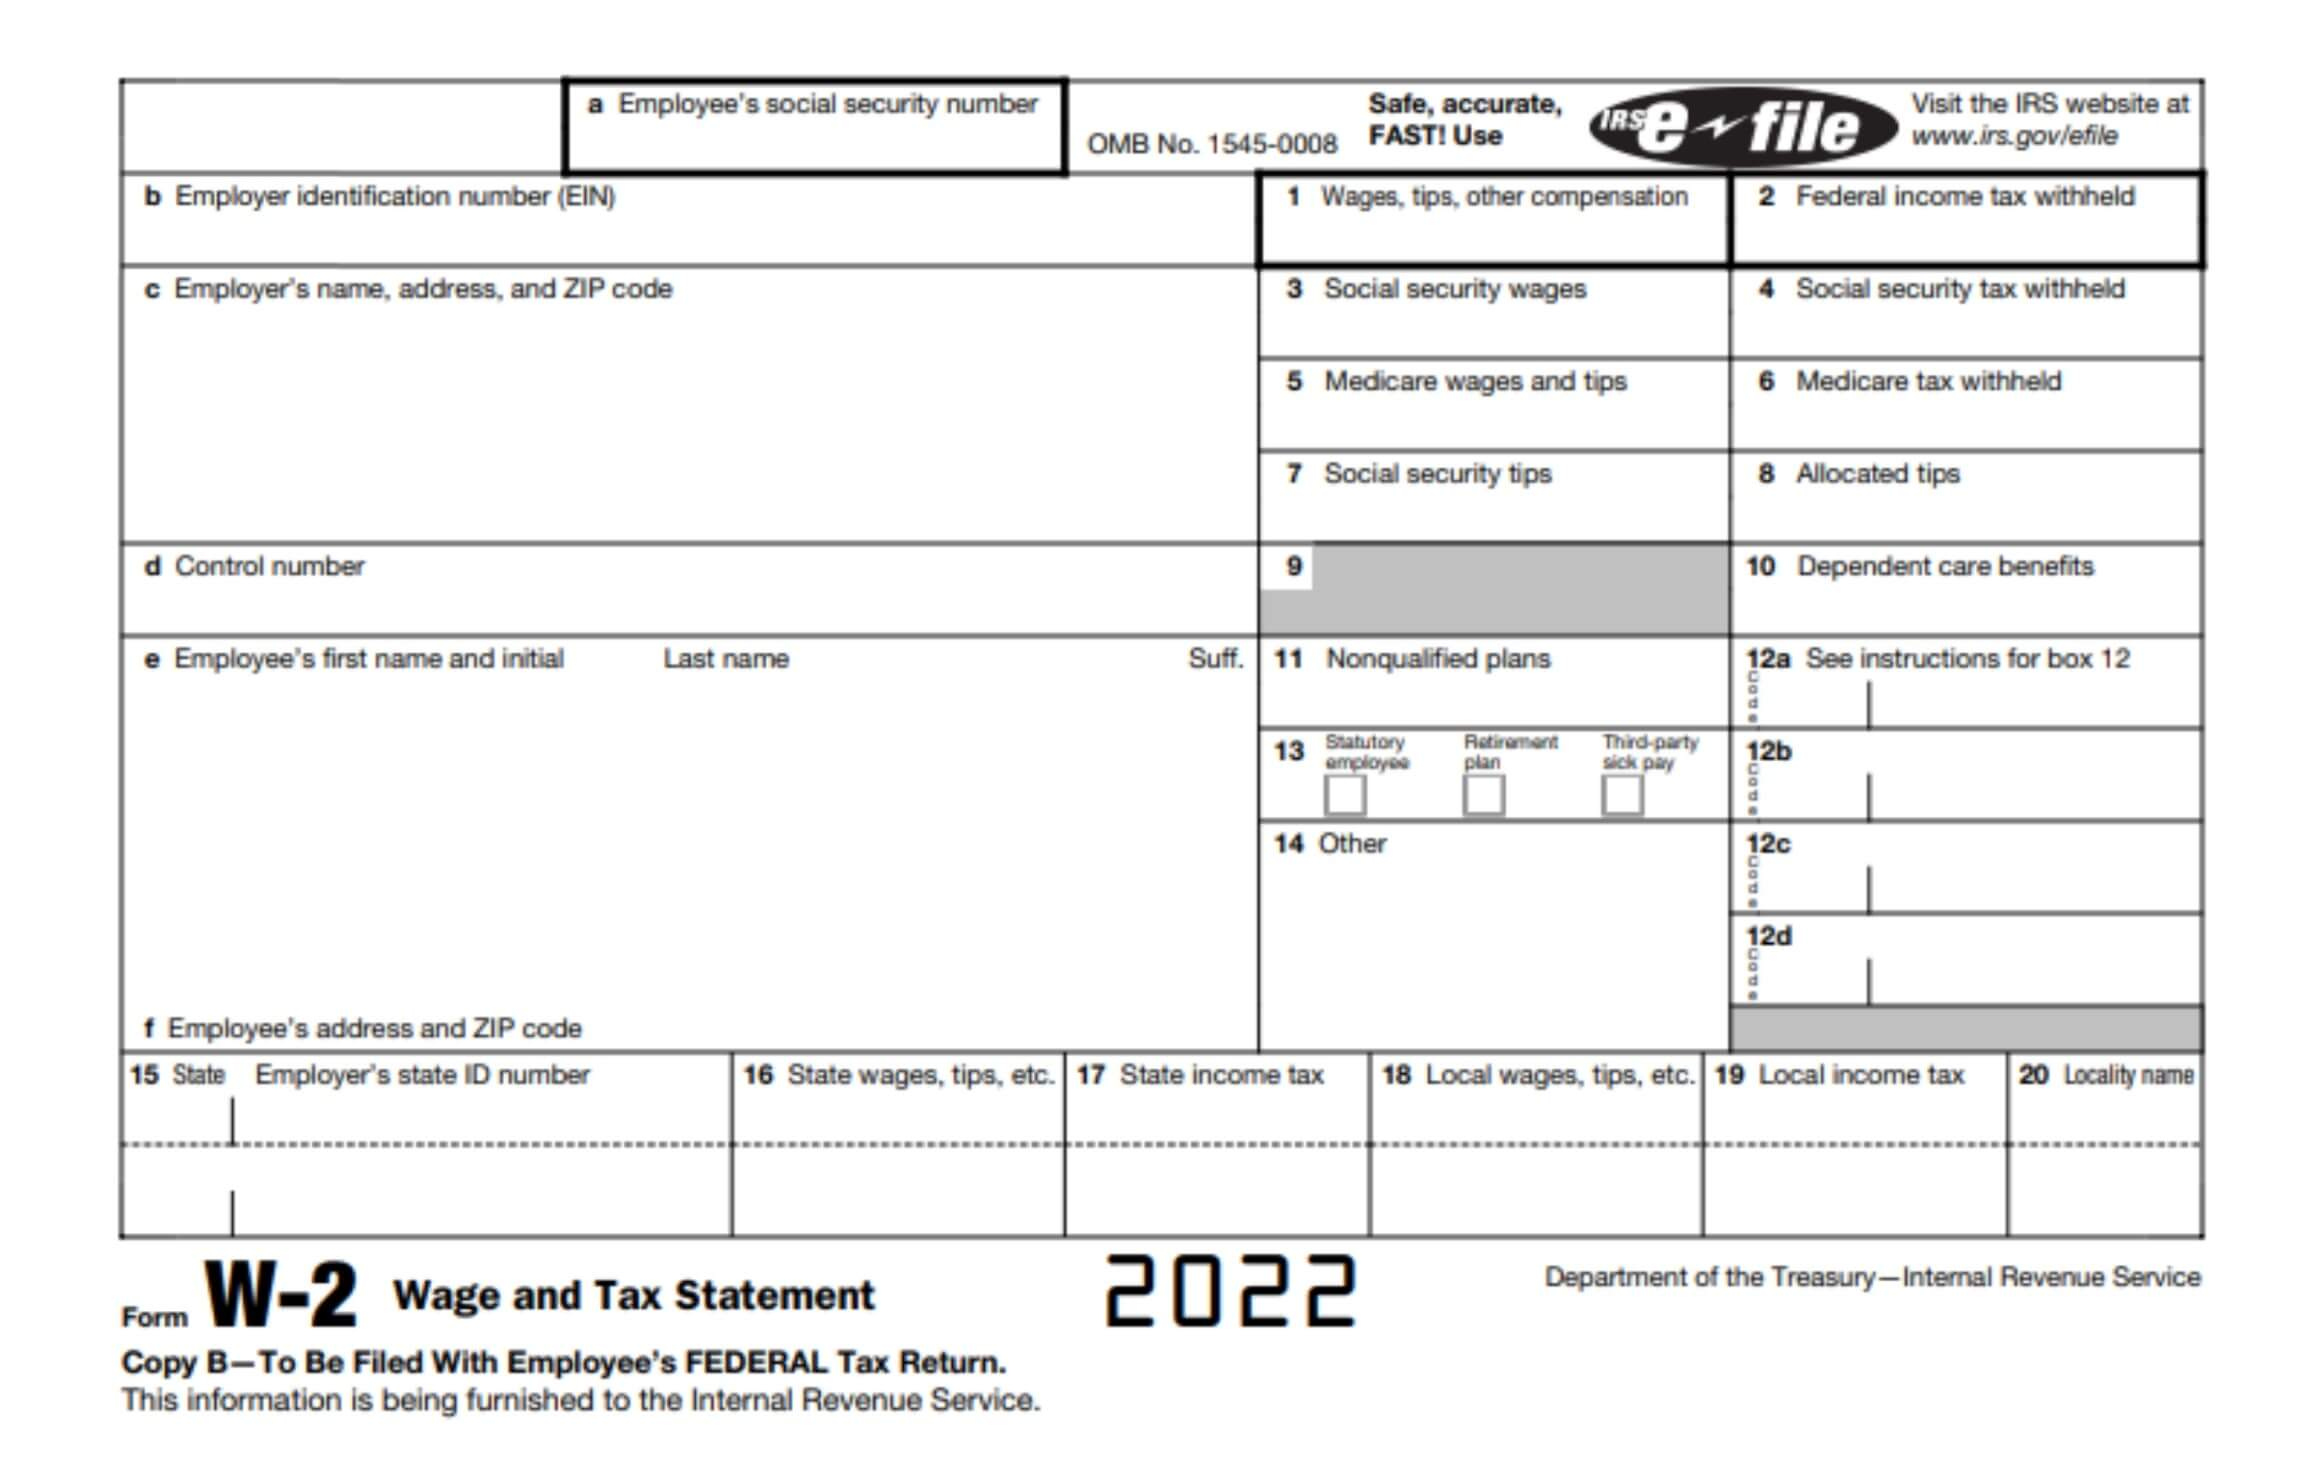 Understanding Your Irs Form W-2 pertaining to Box 12B On W2 Form